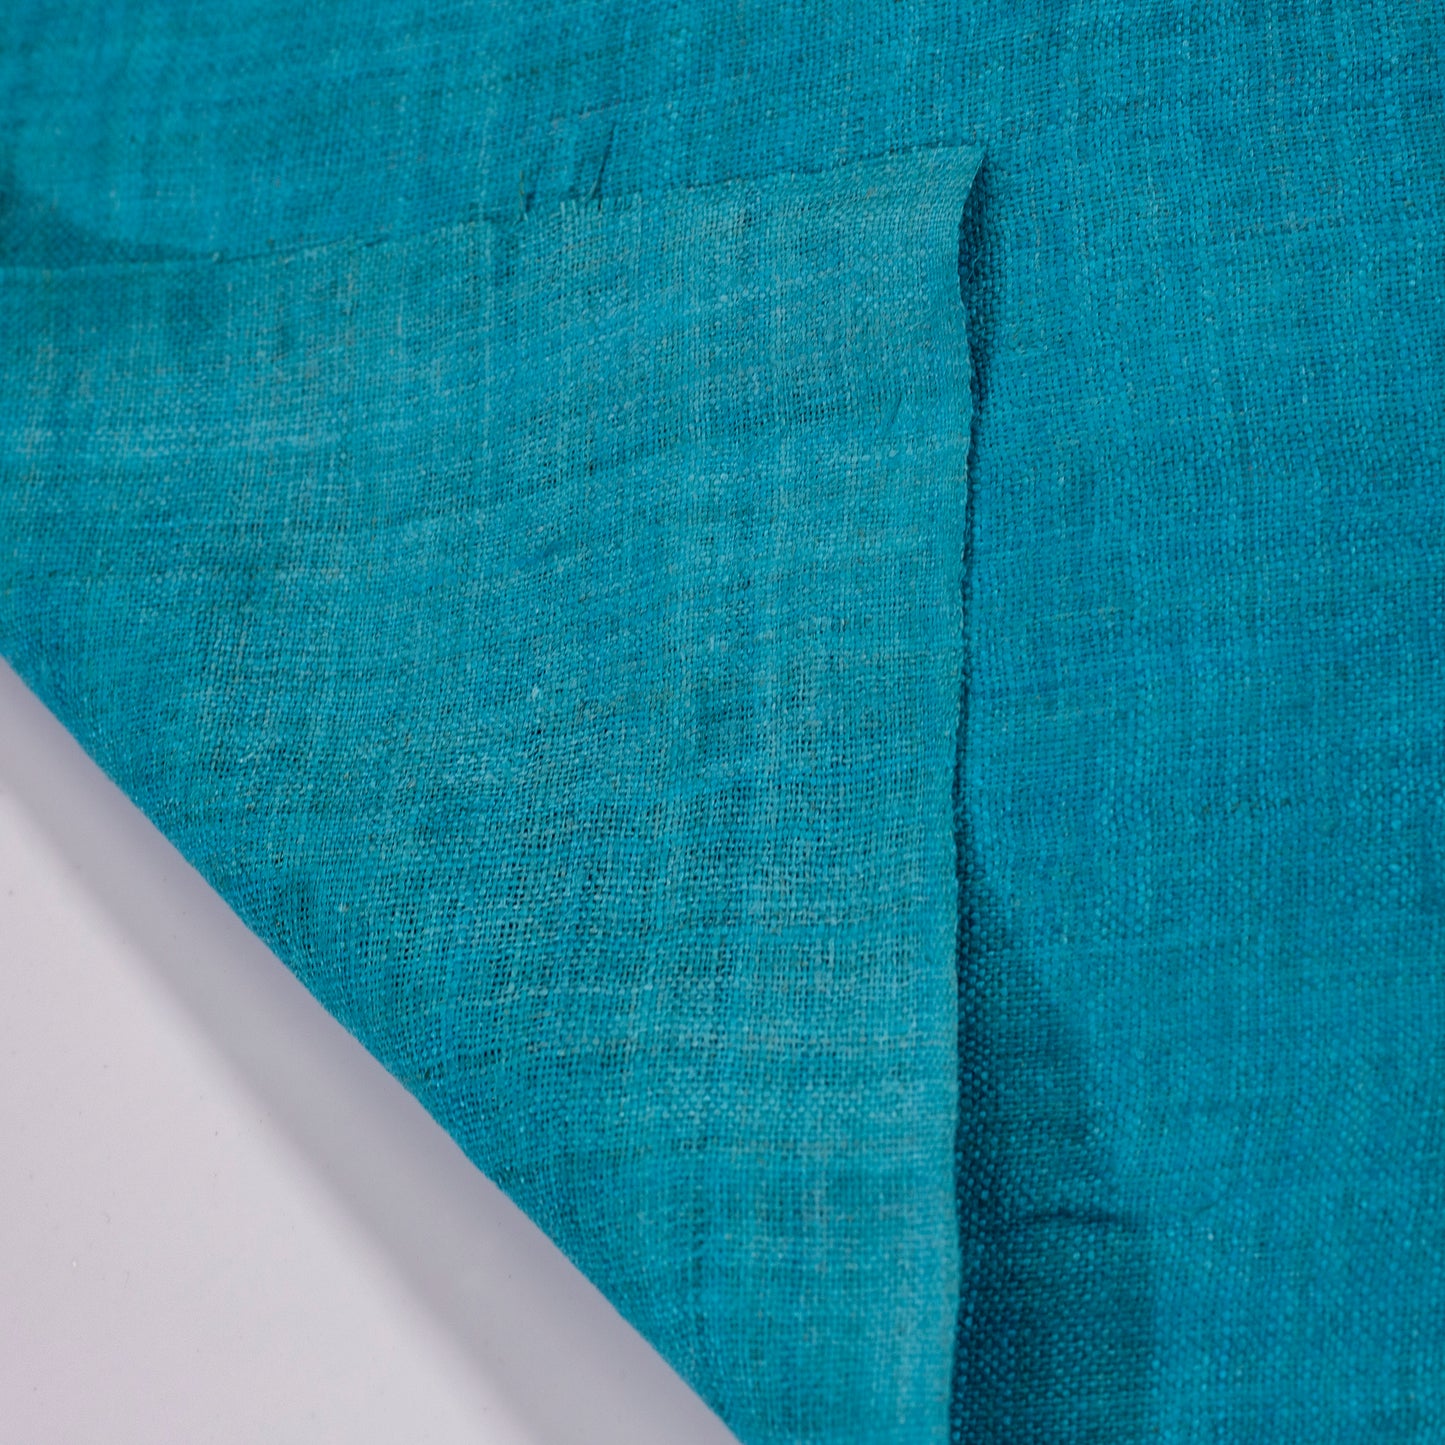 Raw hemp fabric, natural color in TURQUOISE BLUE